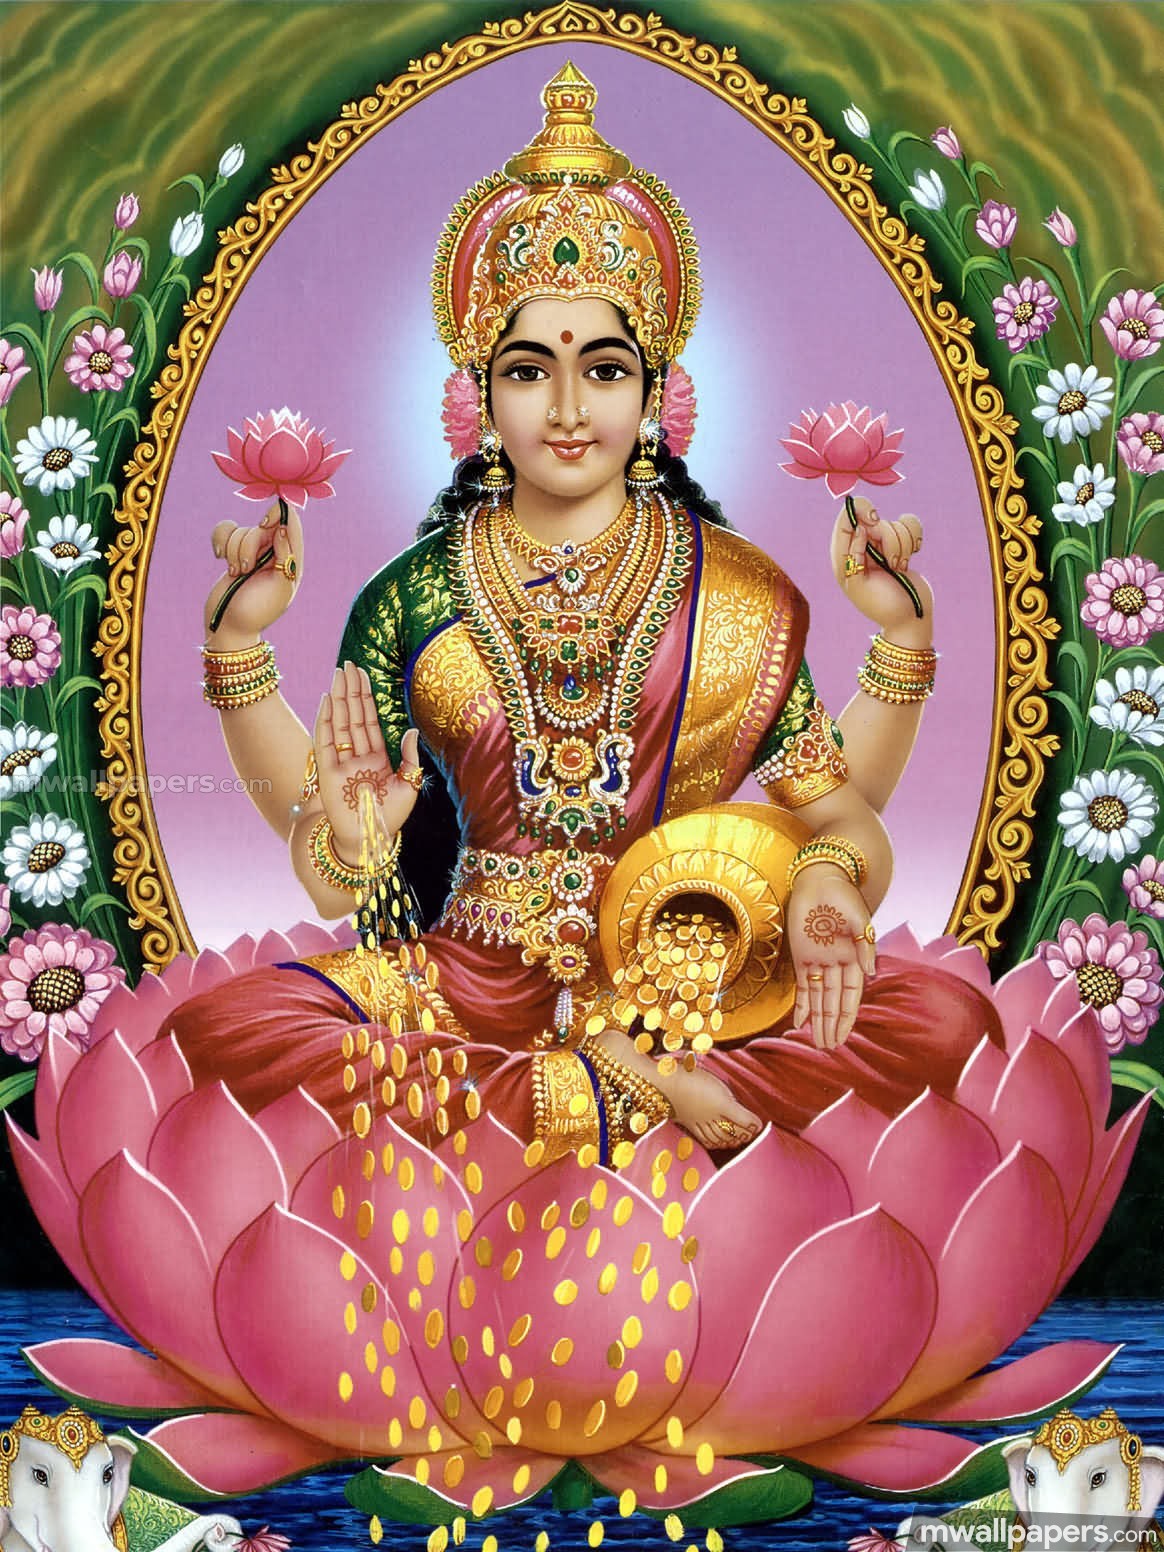 goddess lakshmi wallpapers,statue,hindu temple,place of worship,blessing,temple